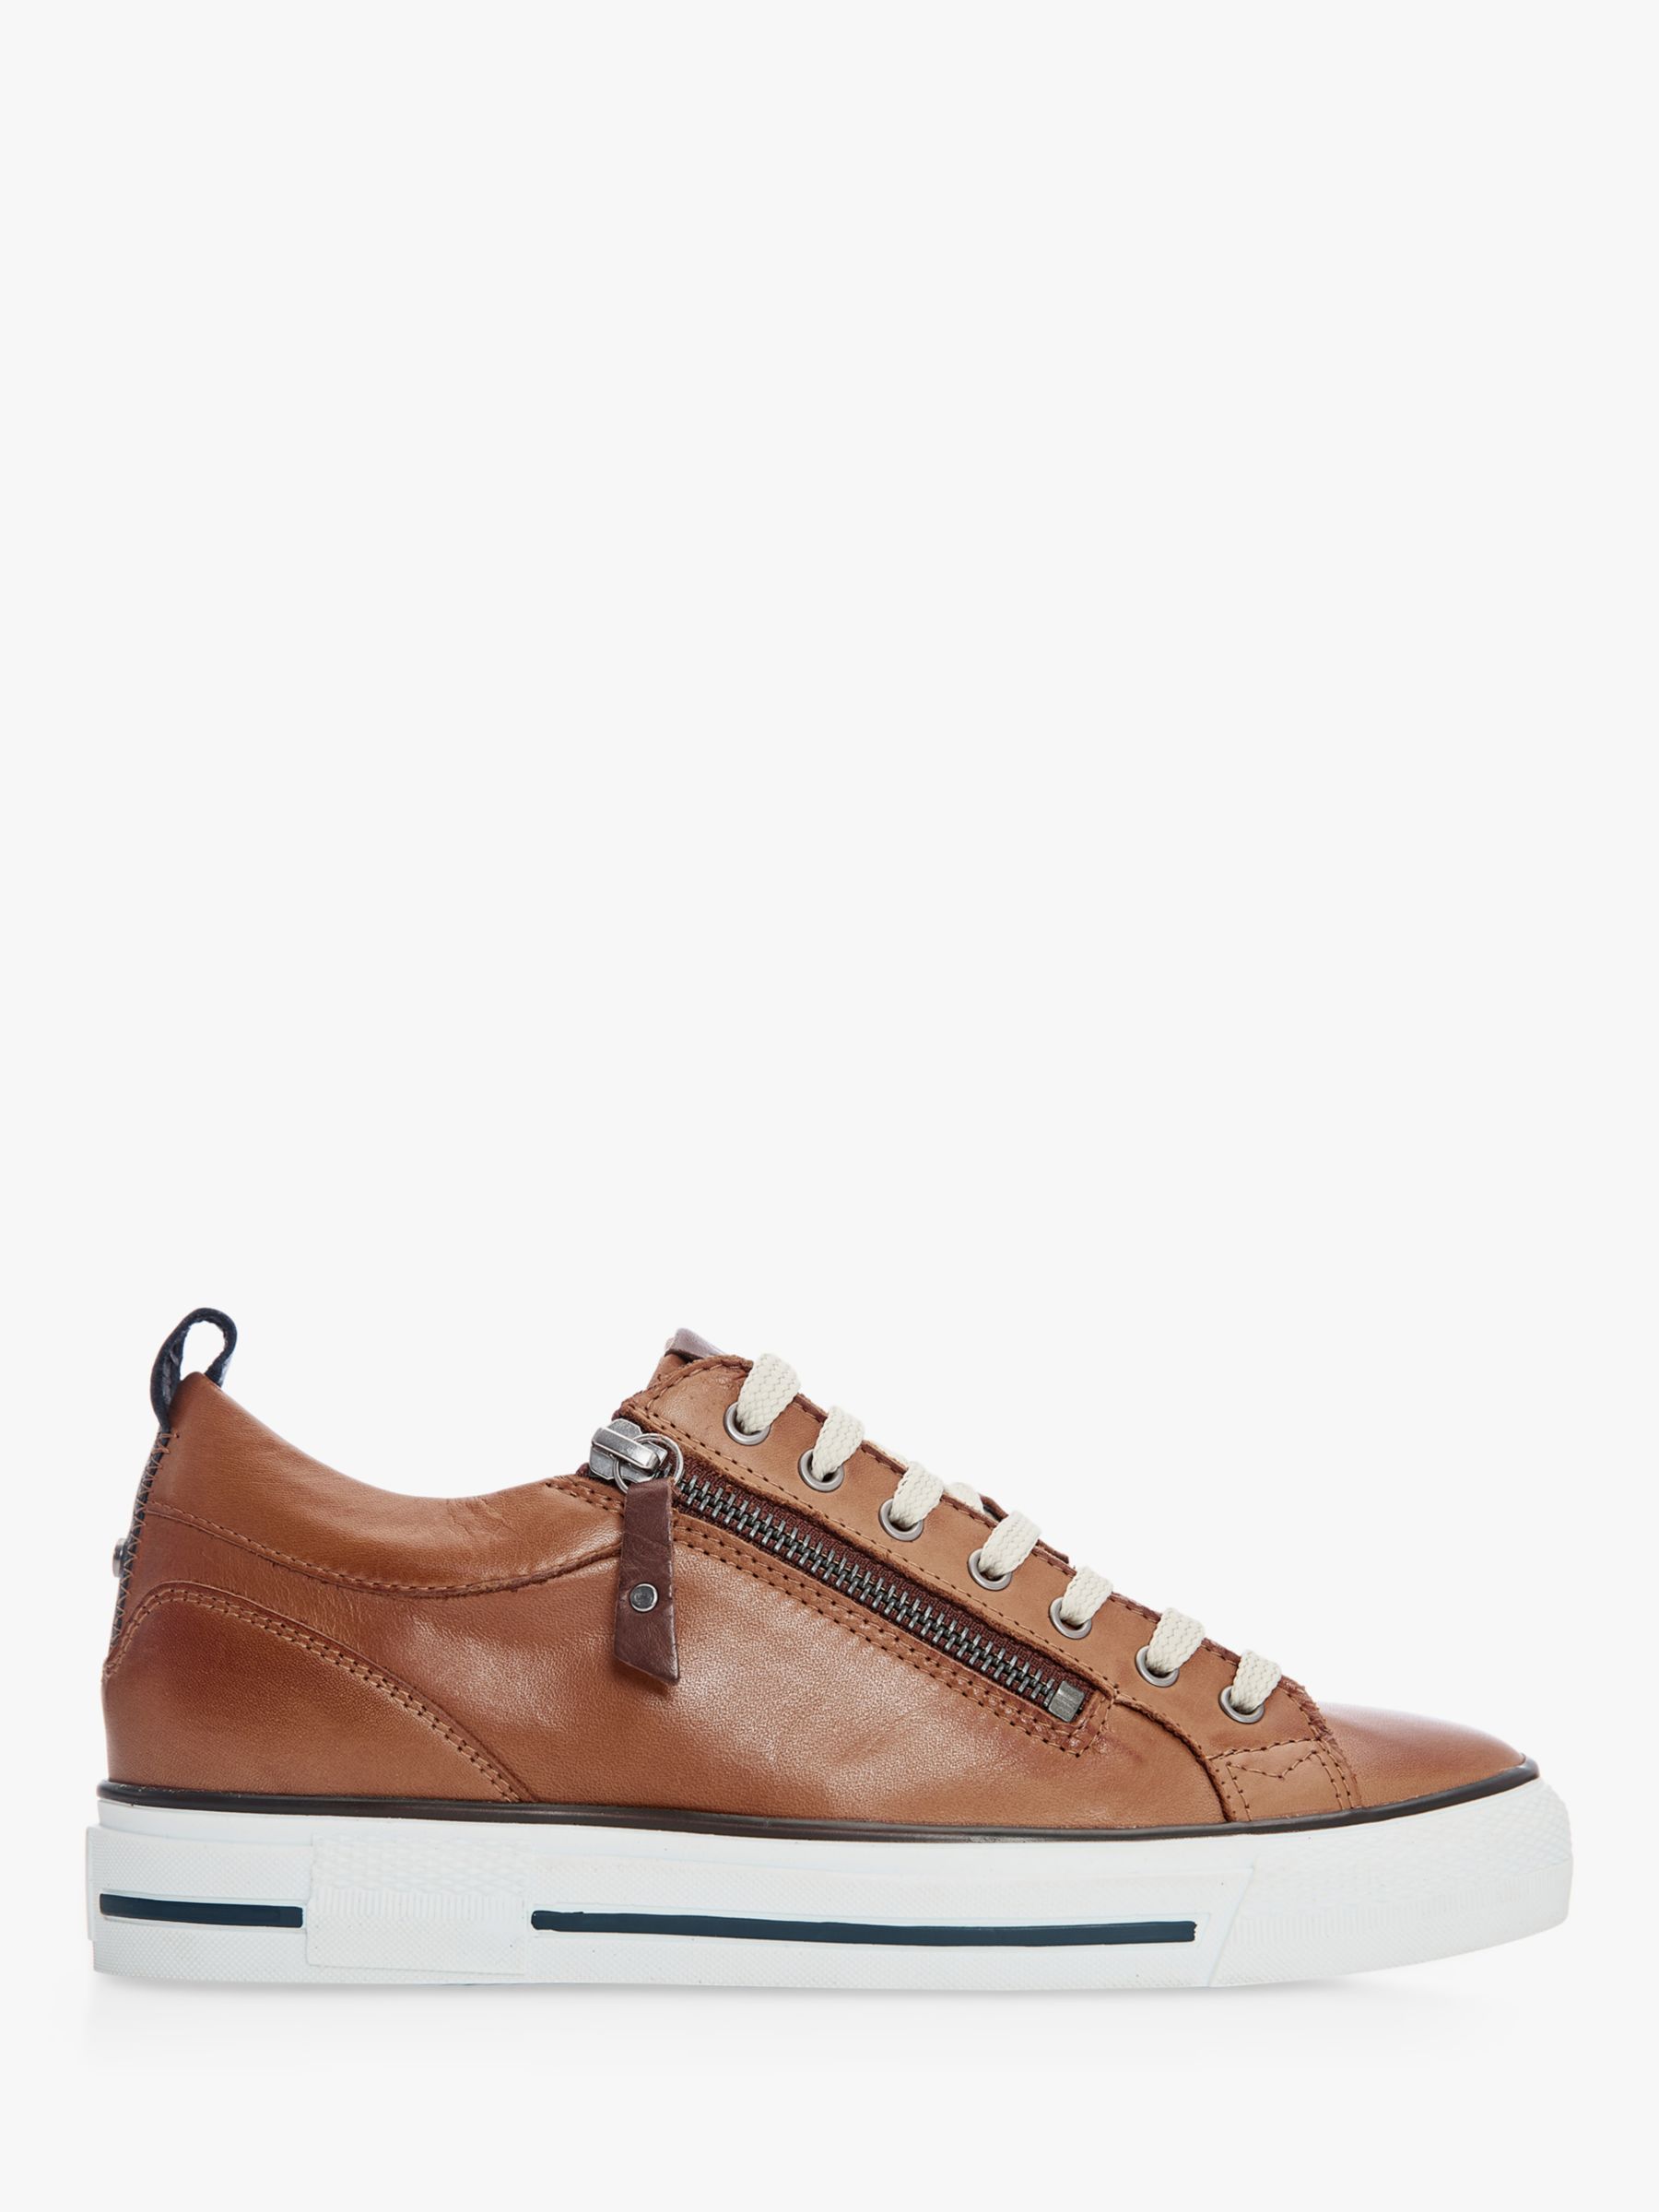 Moda in Pelle Brayleigh Leather Zip Up Trainers, Tan at John Lewis ...